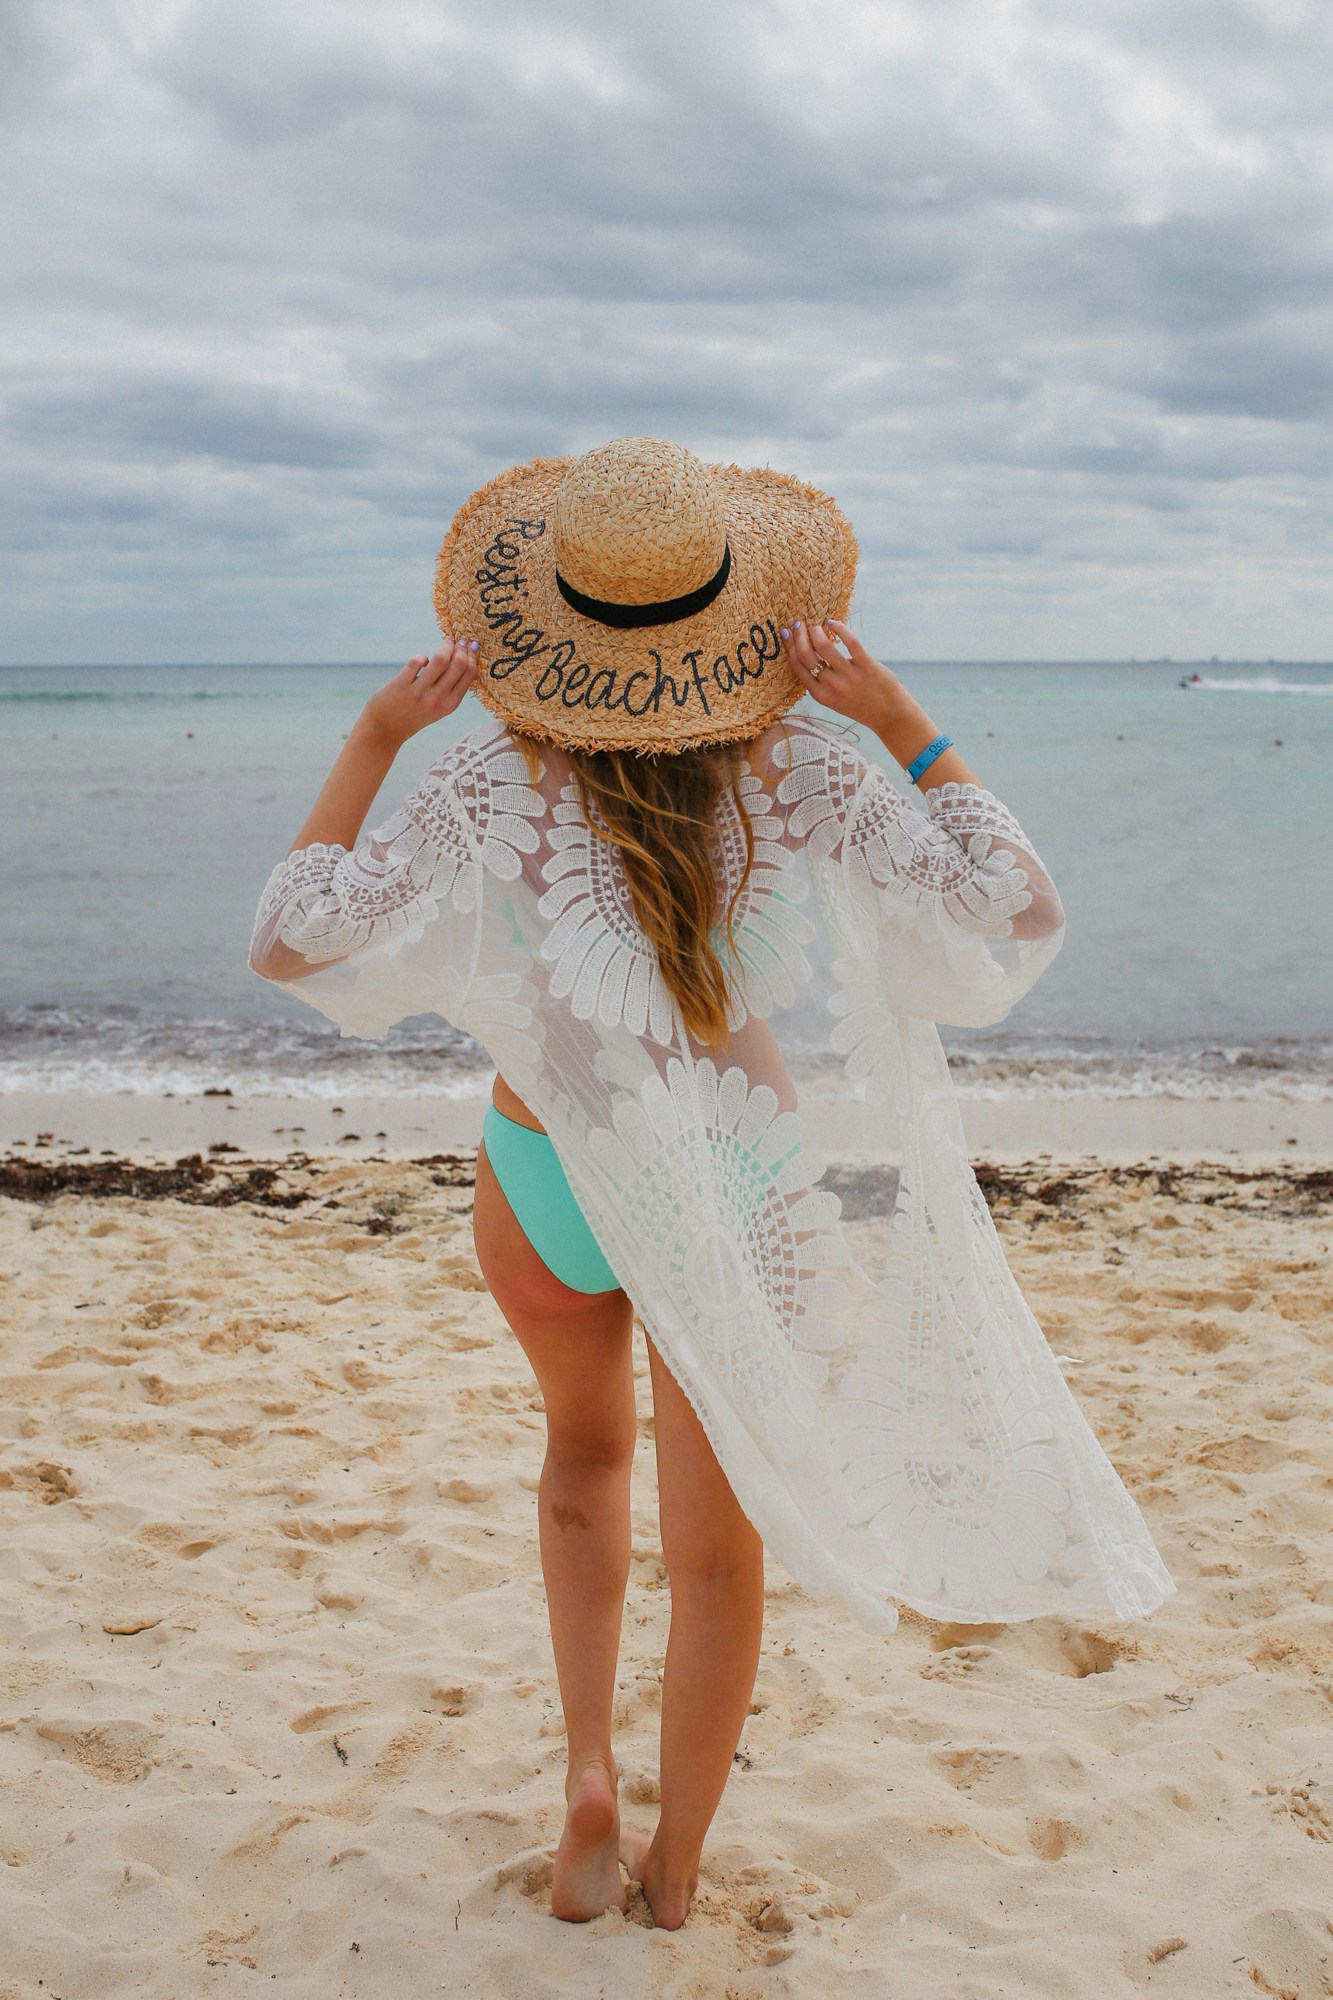 This white lace beach coverup from Amazon is a must-buy! I love how inexpensive it is and it's so chic! Also wearing a Resting Beach Face sunhat for a cheeky resort look.